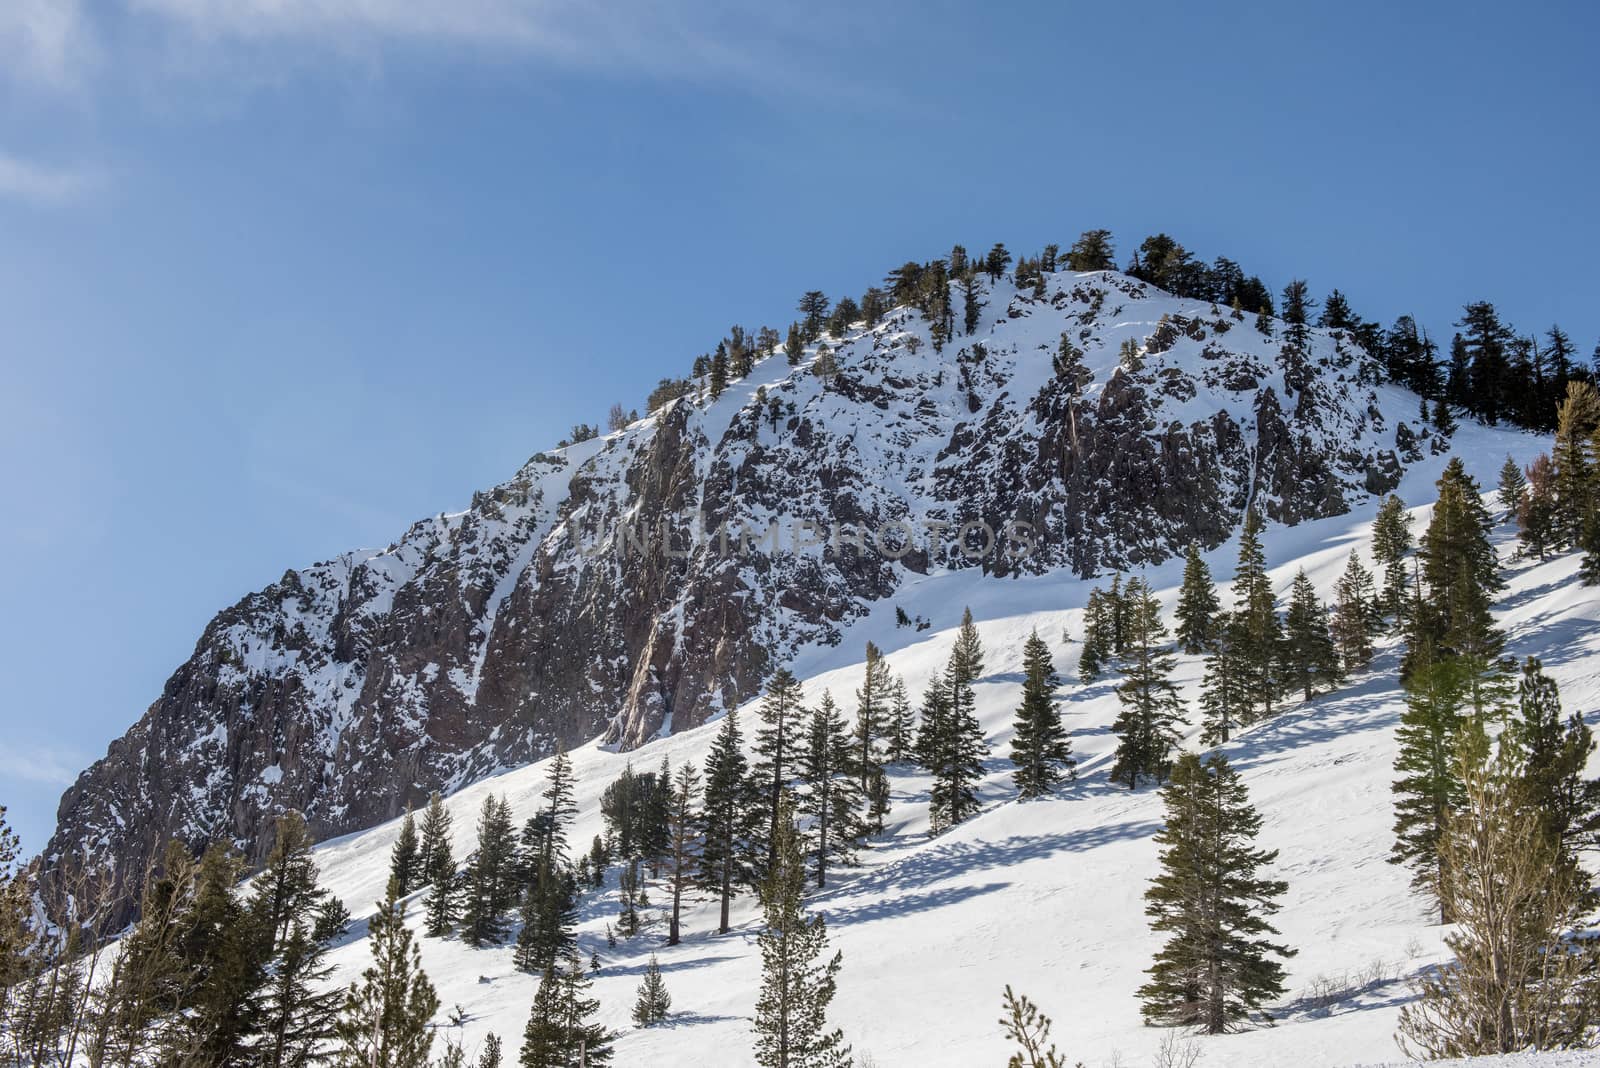 Hillside in Mammoth Lakes, California, January 2017, a record sn by Njean